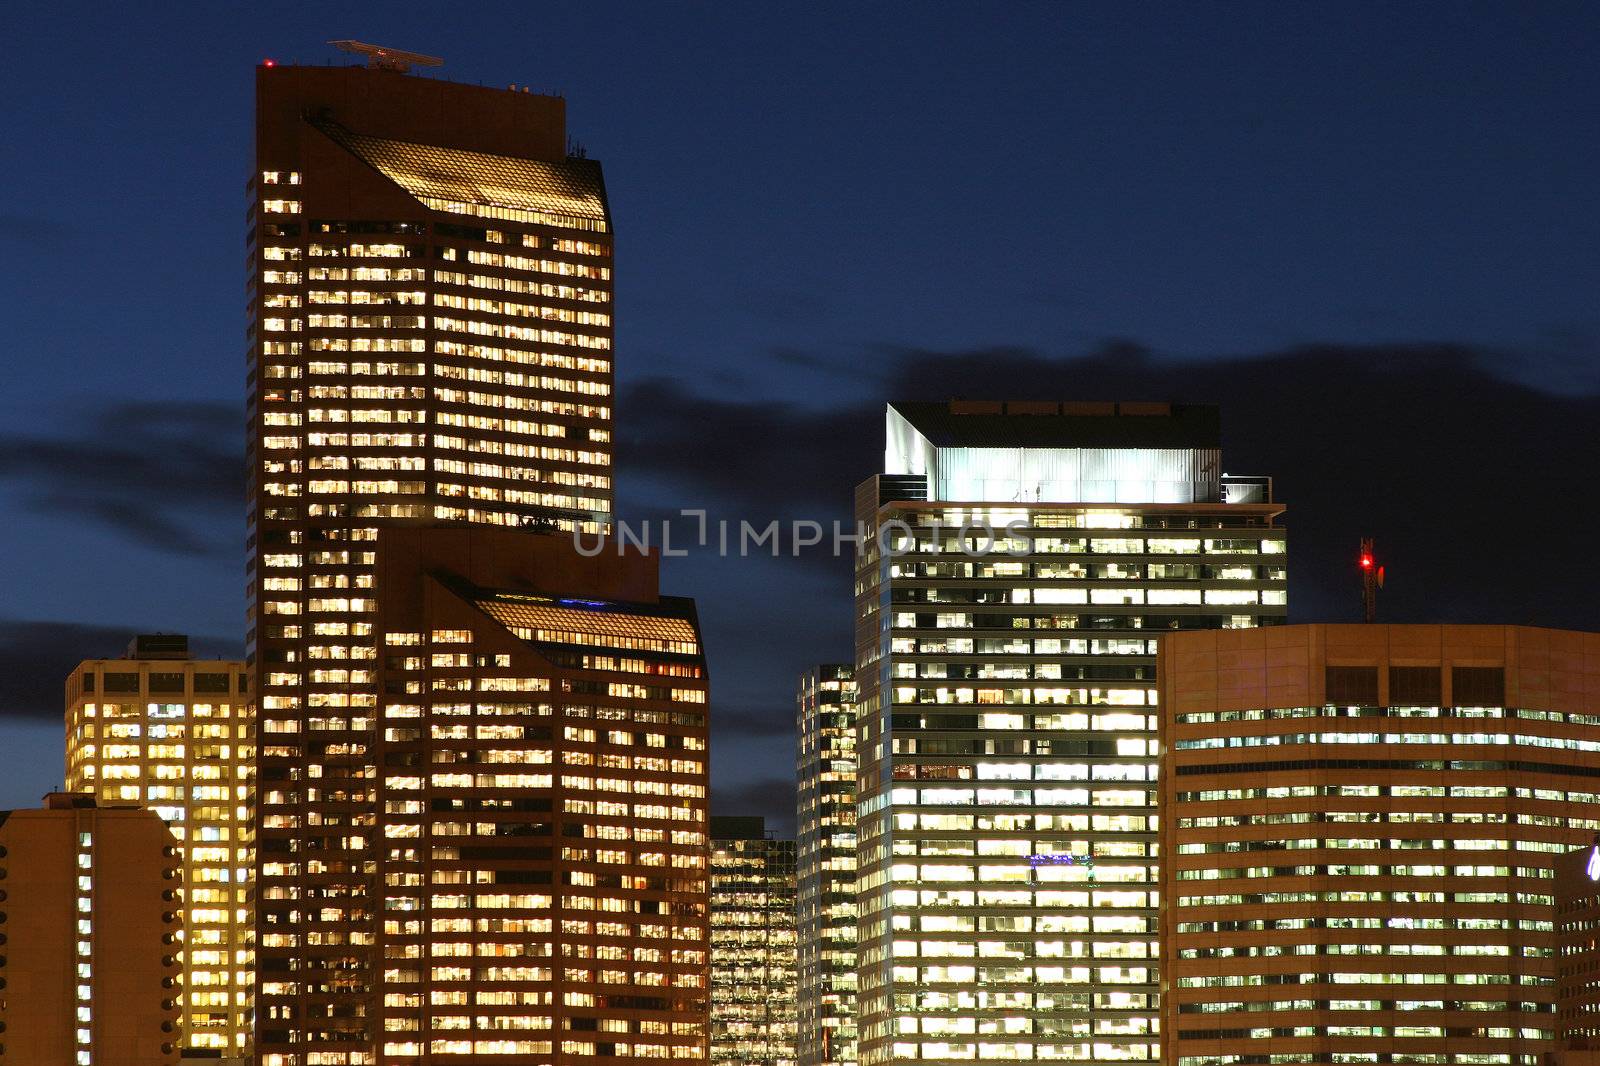 Architecture  Calgary
Low Light Photography  (LLP)